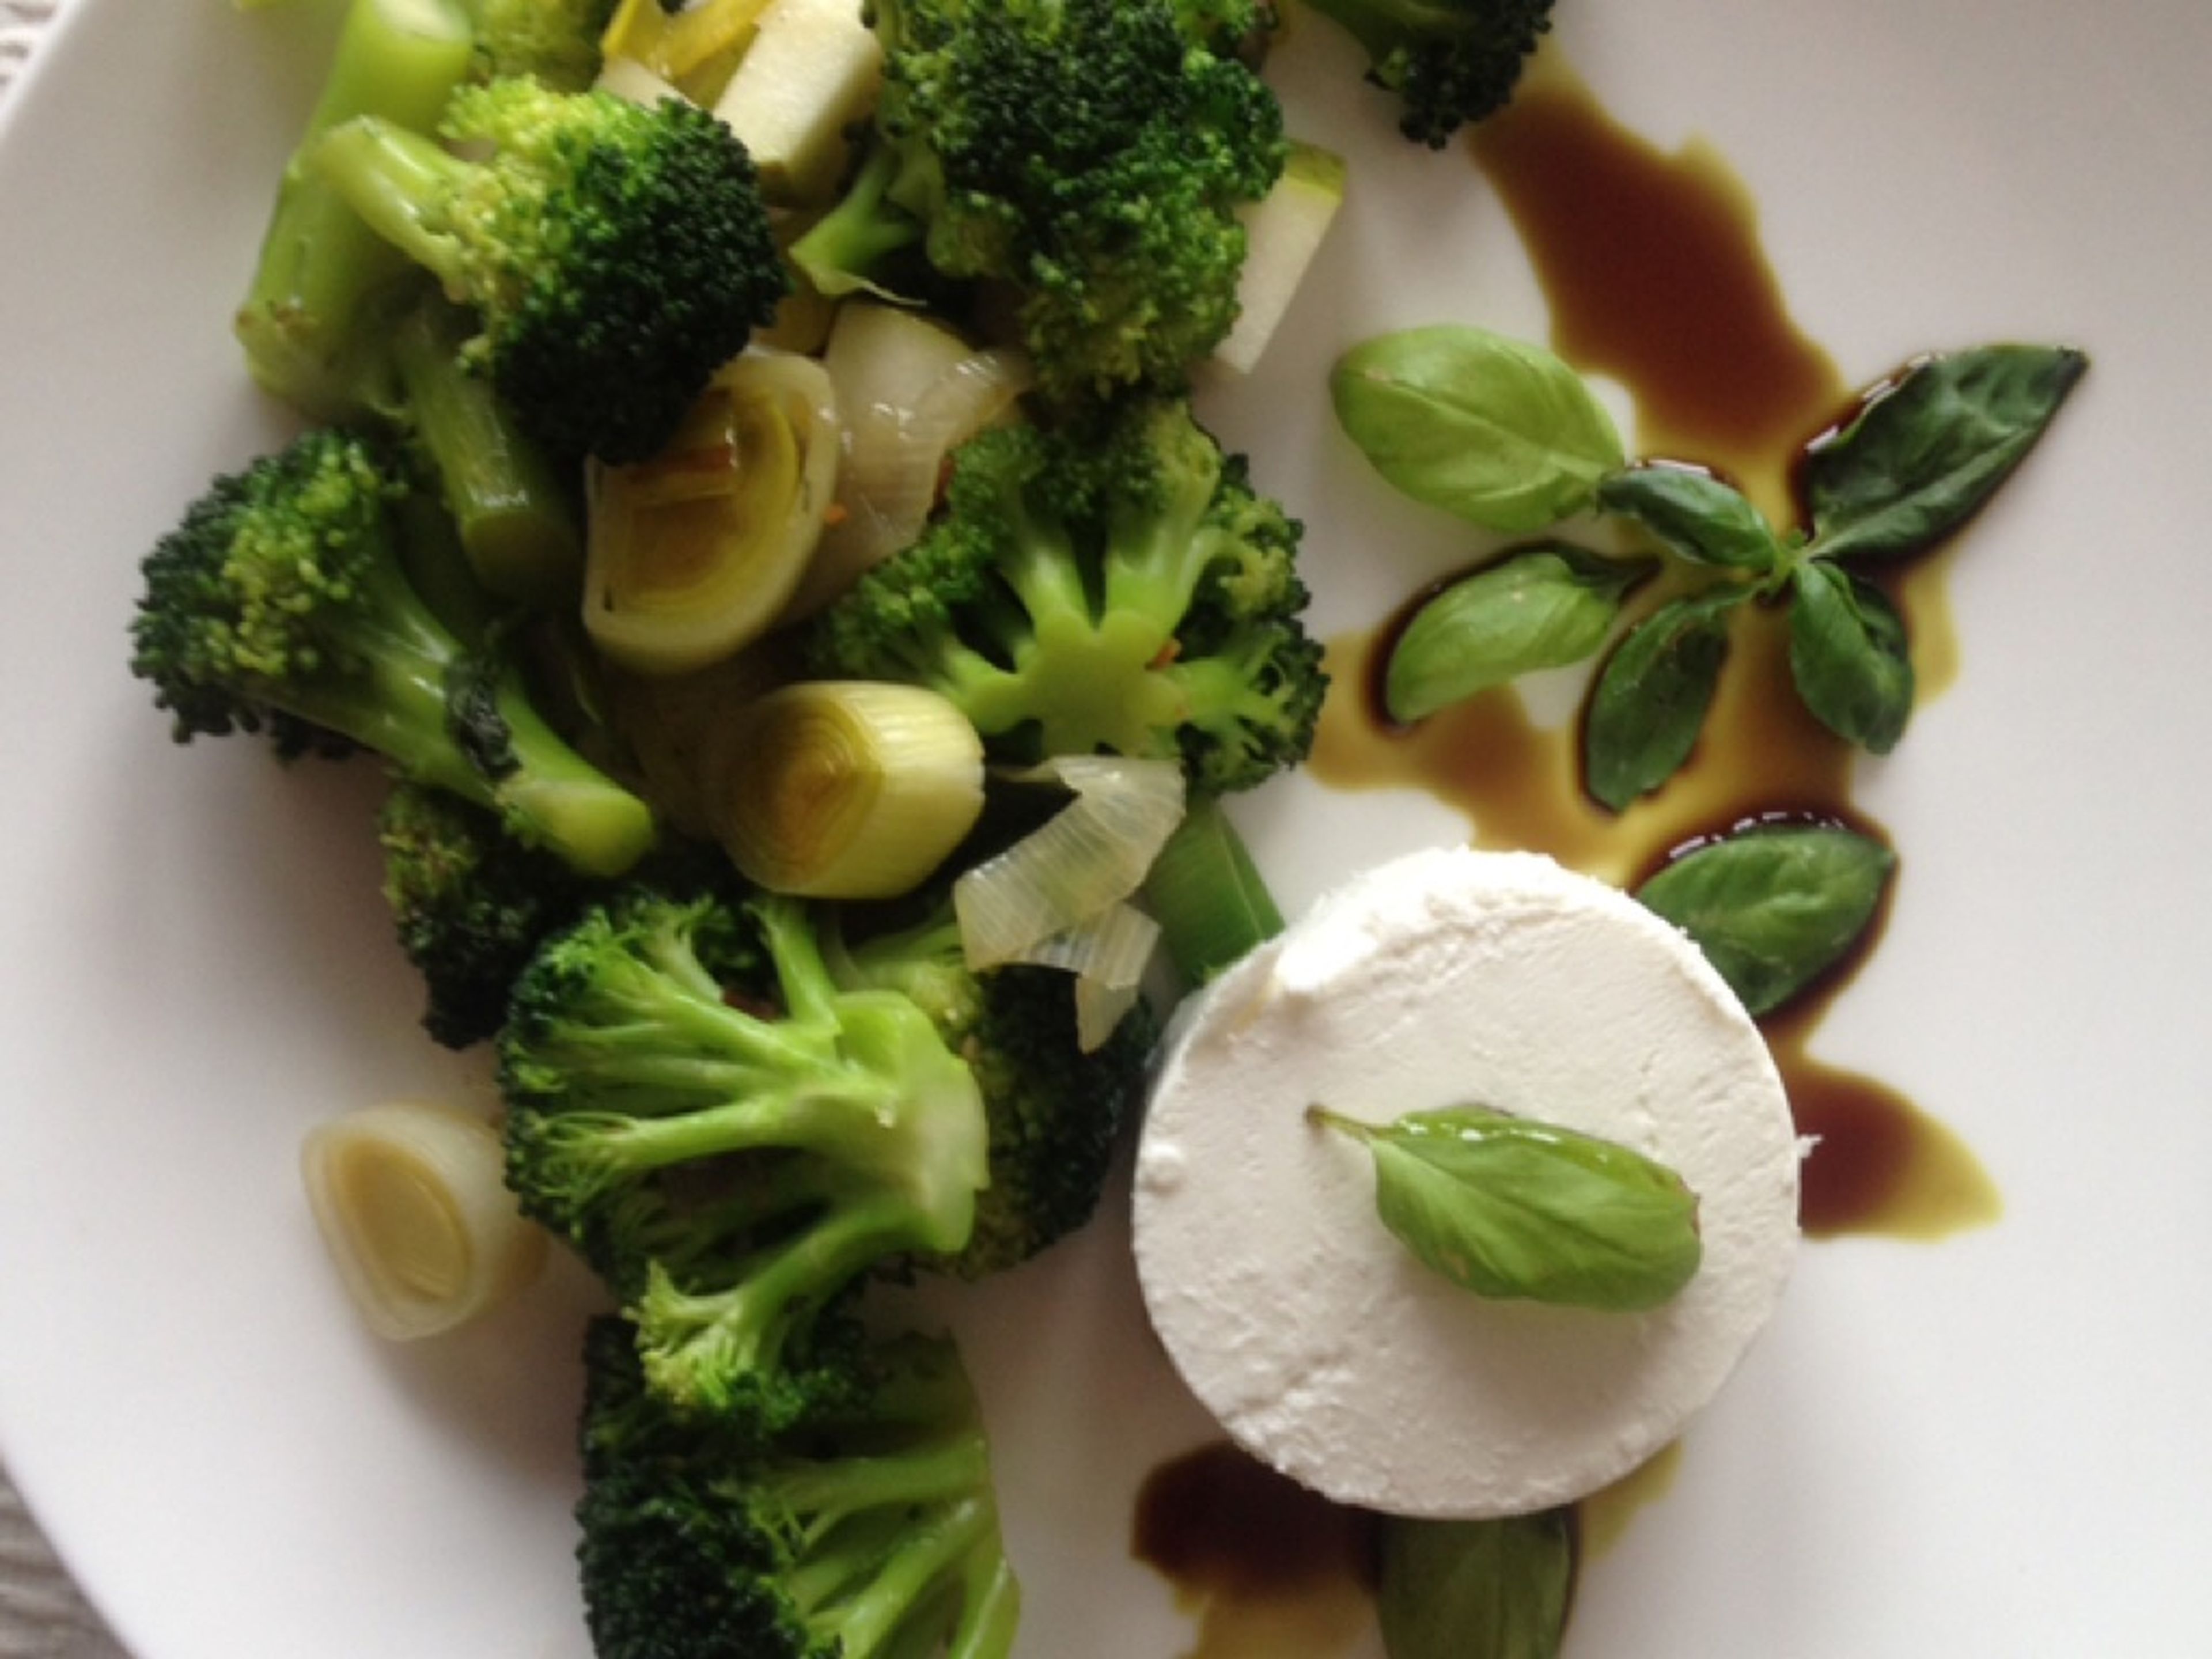 Serve vegetables with goat cheese (cut into discs) and walnuts. Garnish with pumpkin seed oil (this is optional).